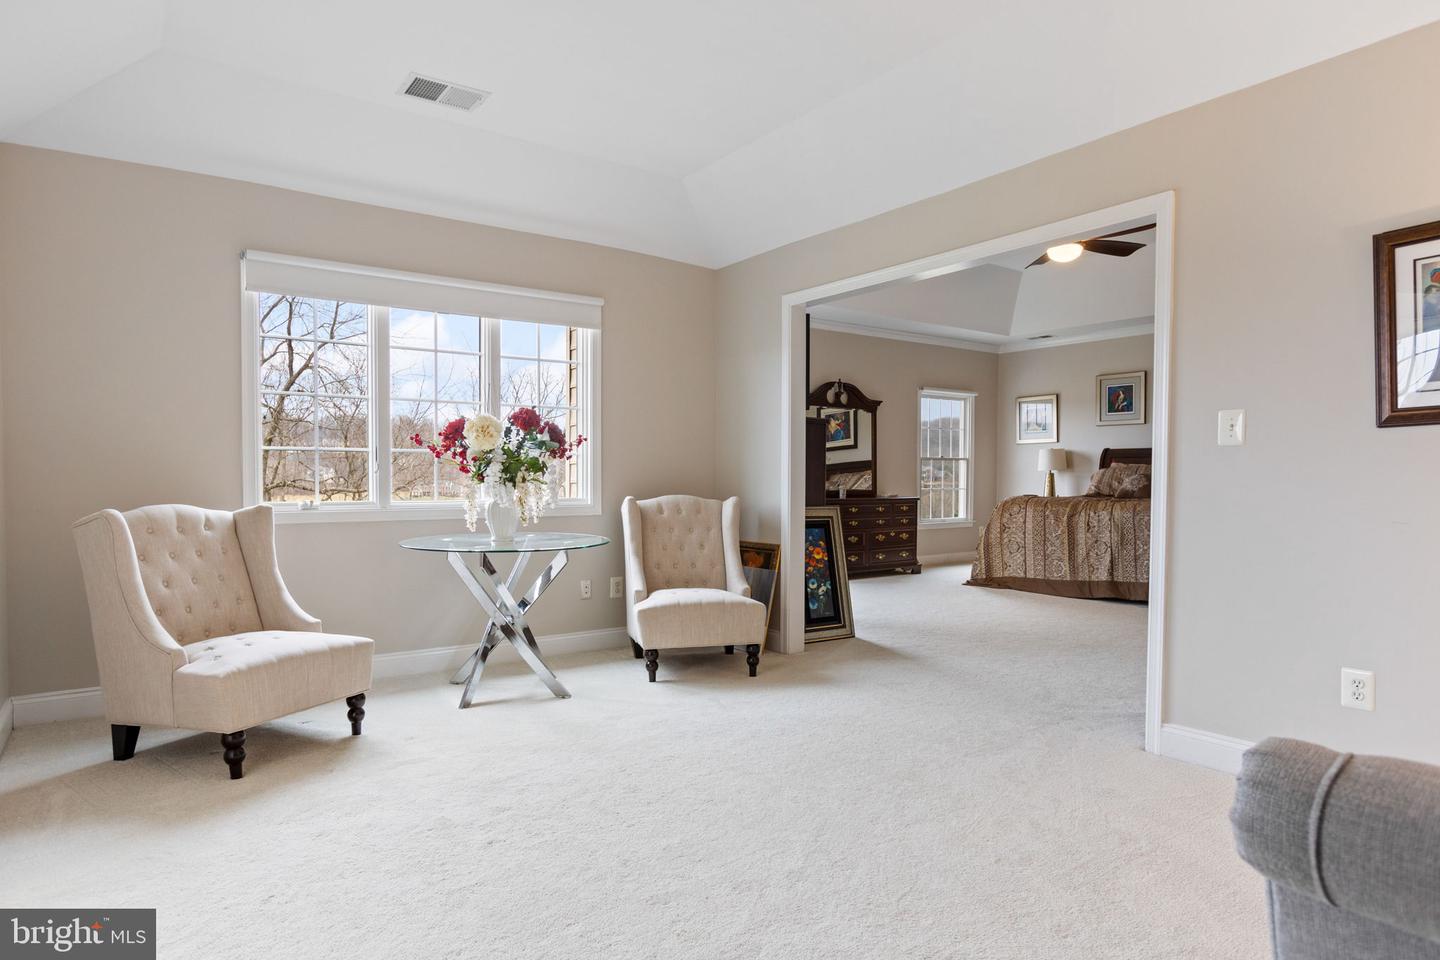 15058 BANKFIELD DR, WATERFORD, Virginia 20197, 5 Bedrooms Bedrooms, ,6 BathroomsBathrooms,Residential,For sale,15058 BANKFIELD DR,VALO2060686 MLS # VALO2060686